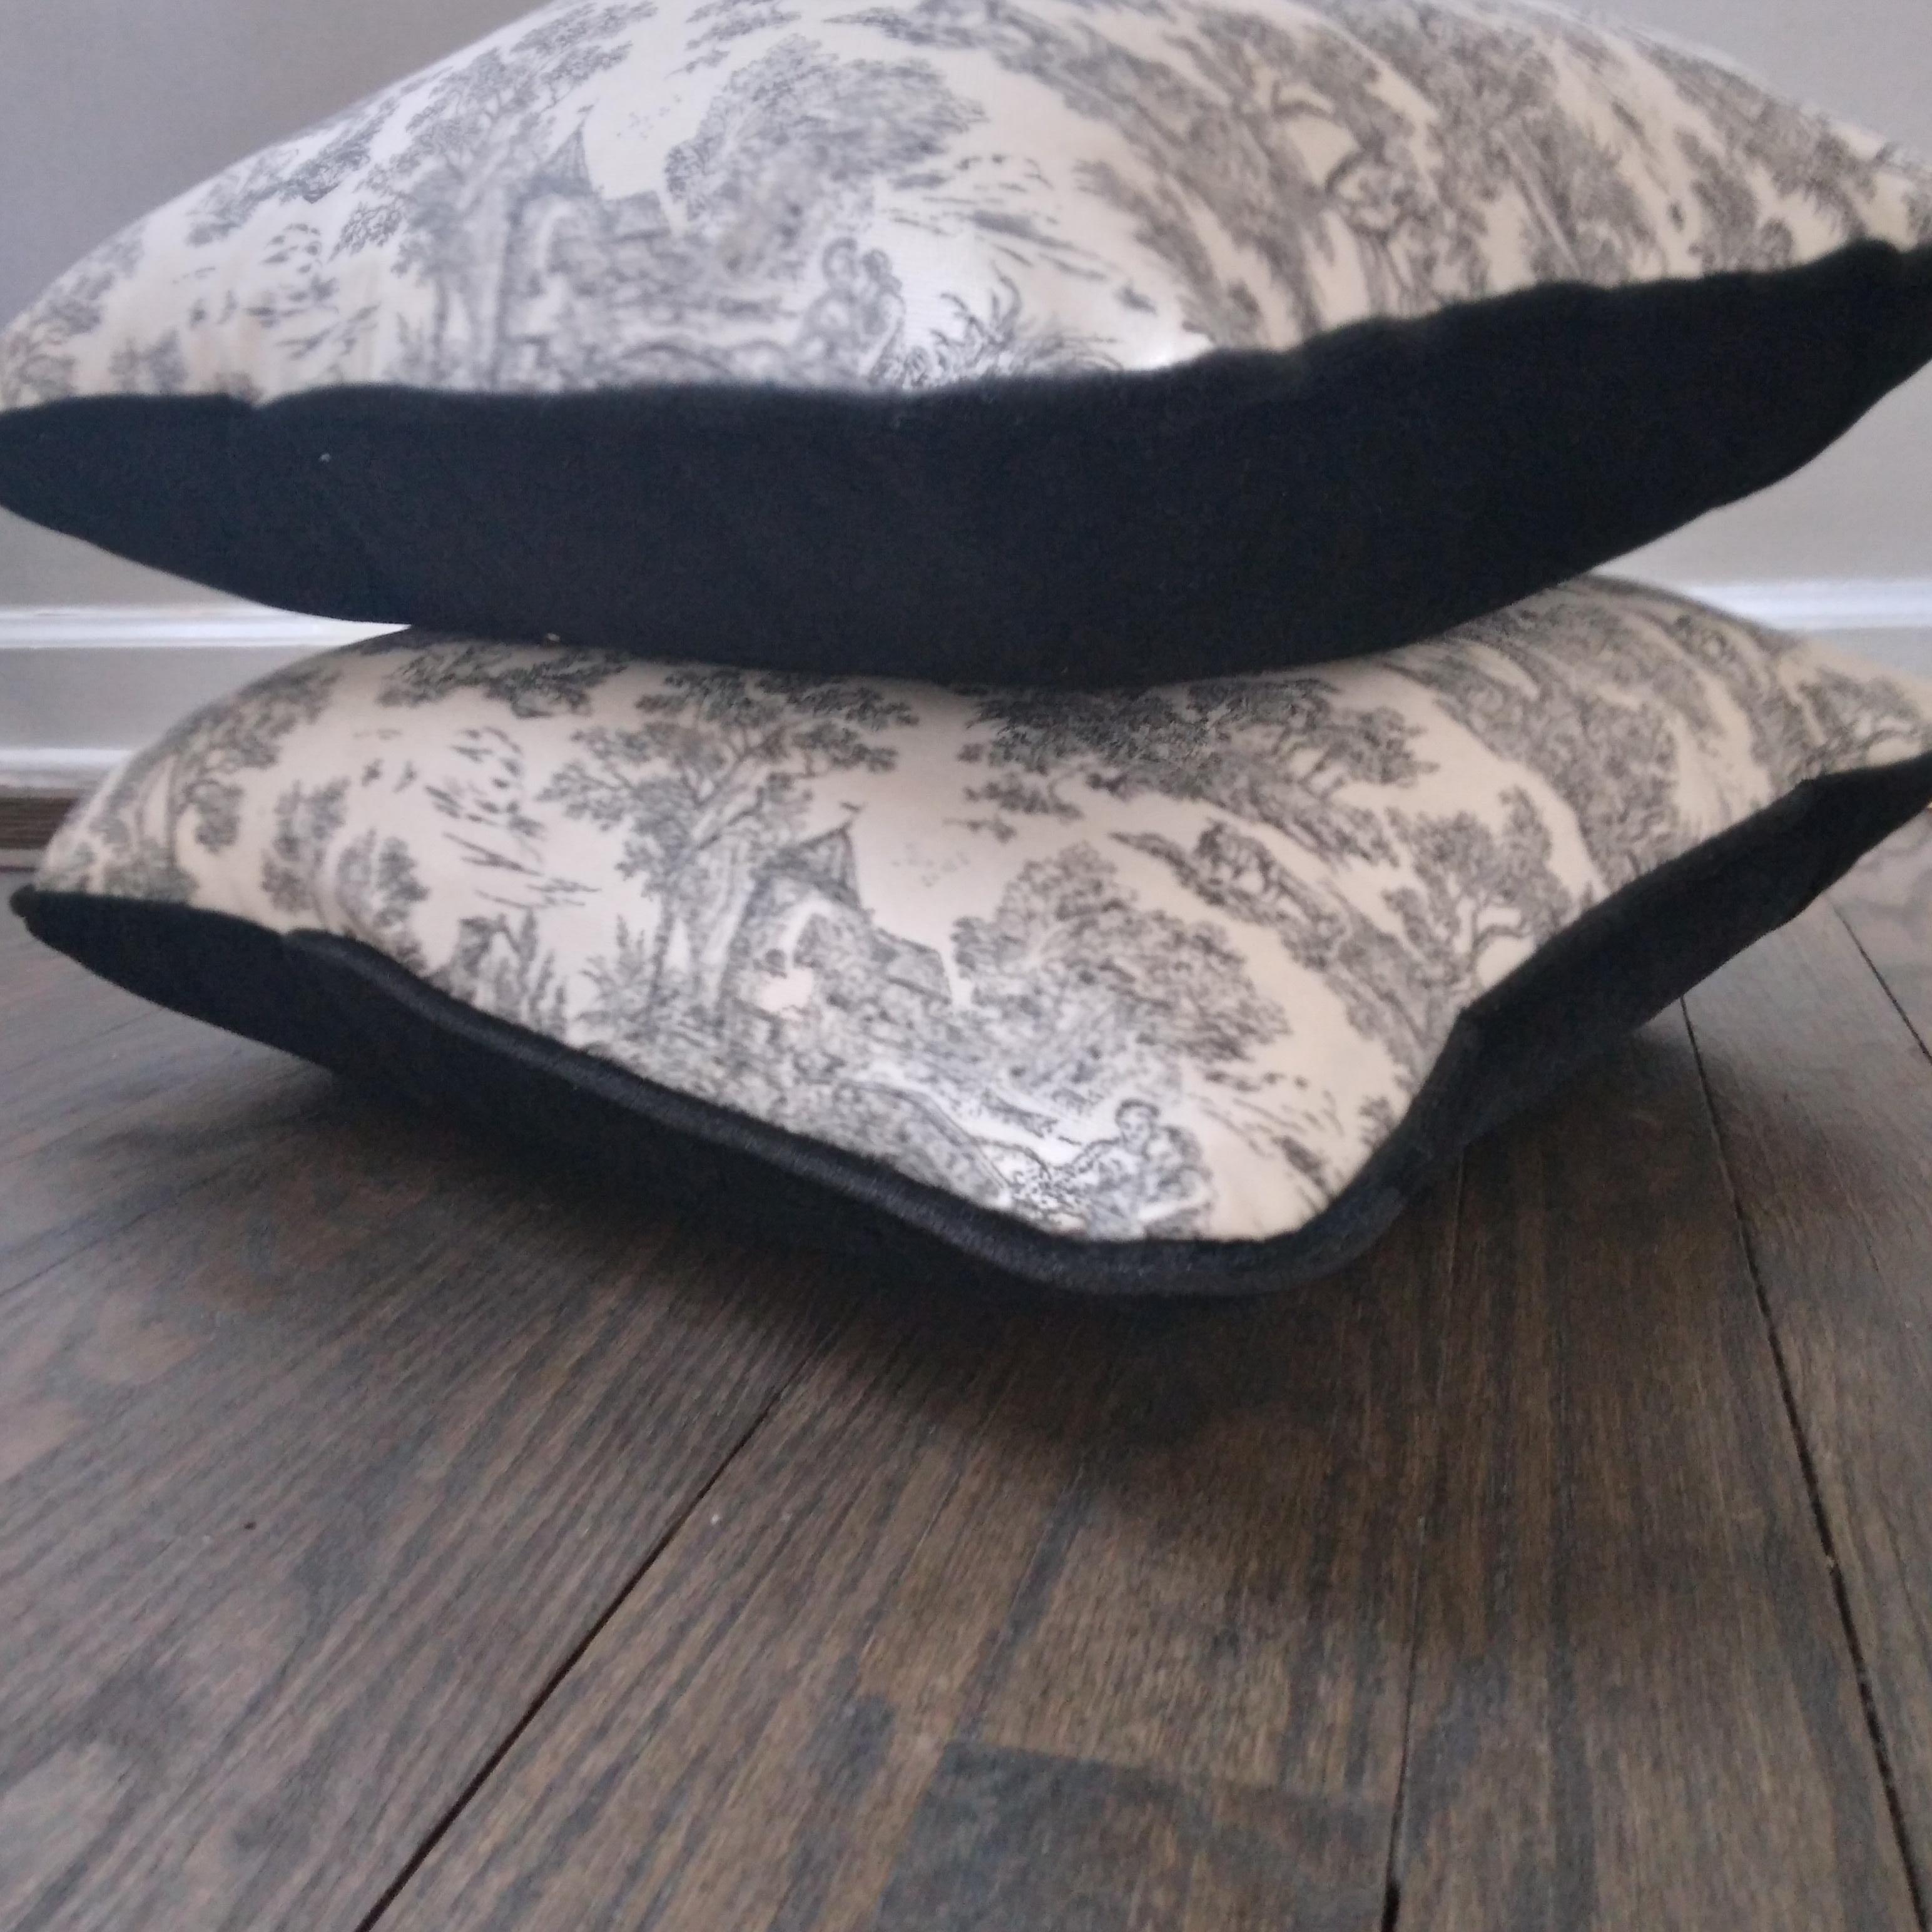 Black and White Toile Print Pillows with Black Velvet Backing - a pair For Sale 2